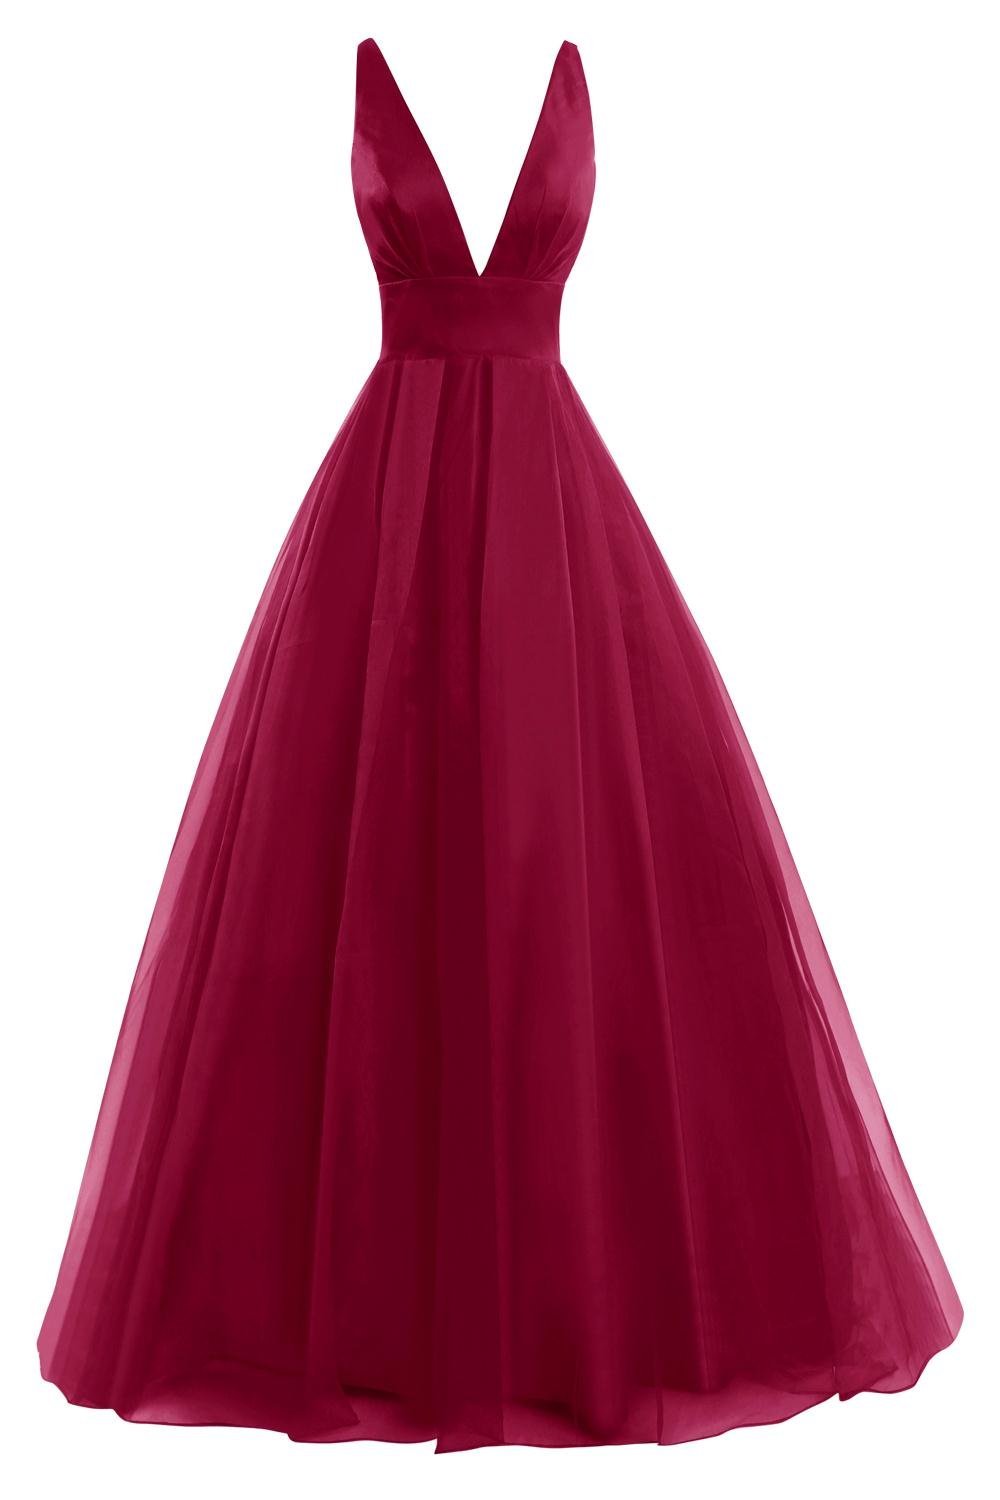 Plunge V Long A-Line Chiffon Evening Gown, Formal Gown, Prom Gown on Luulla